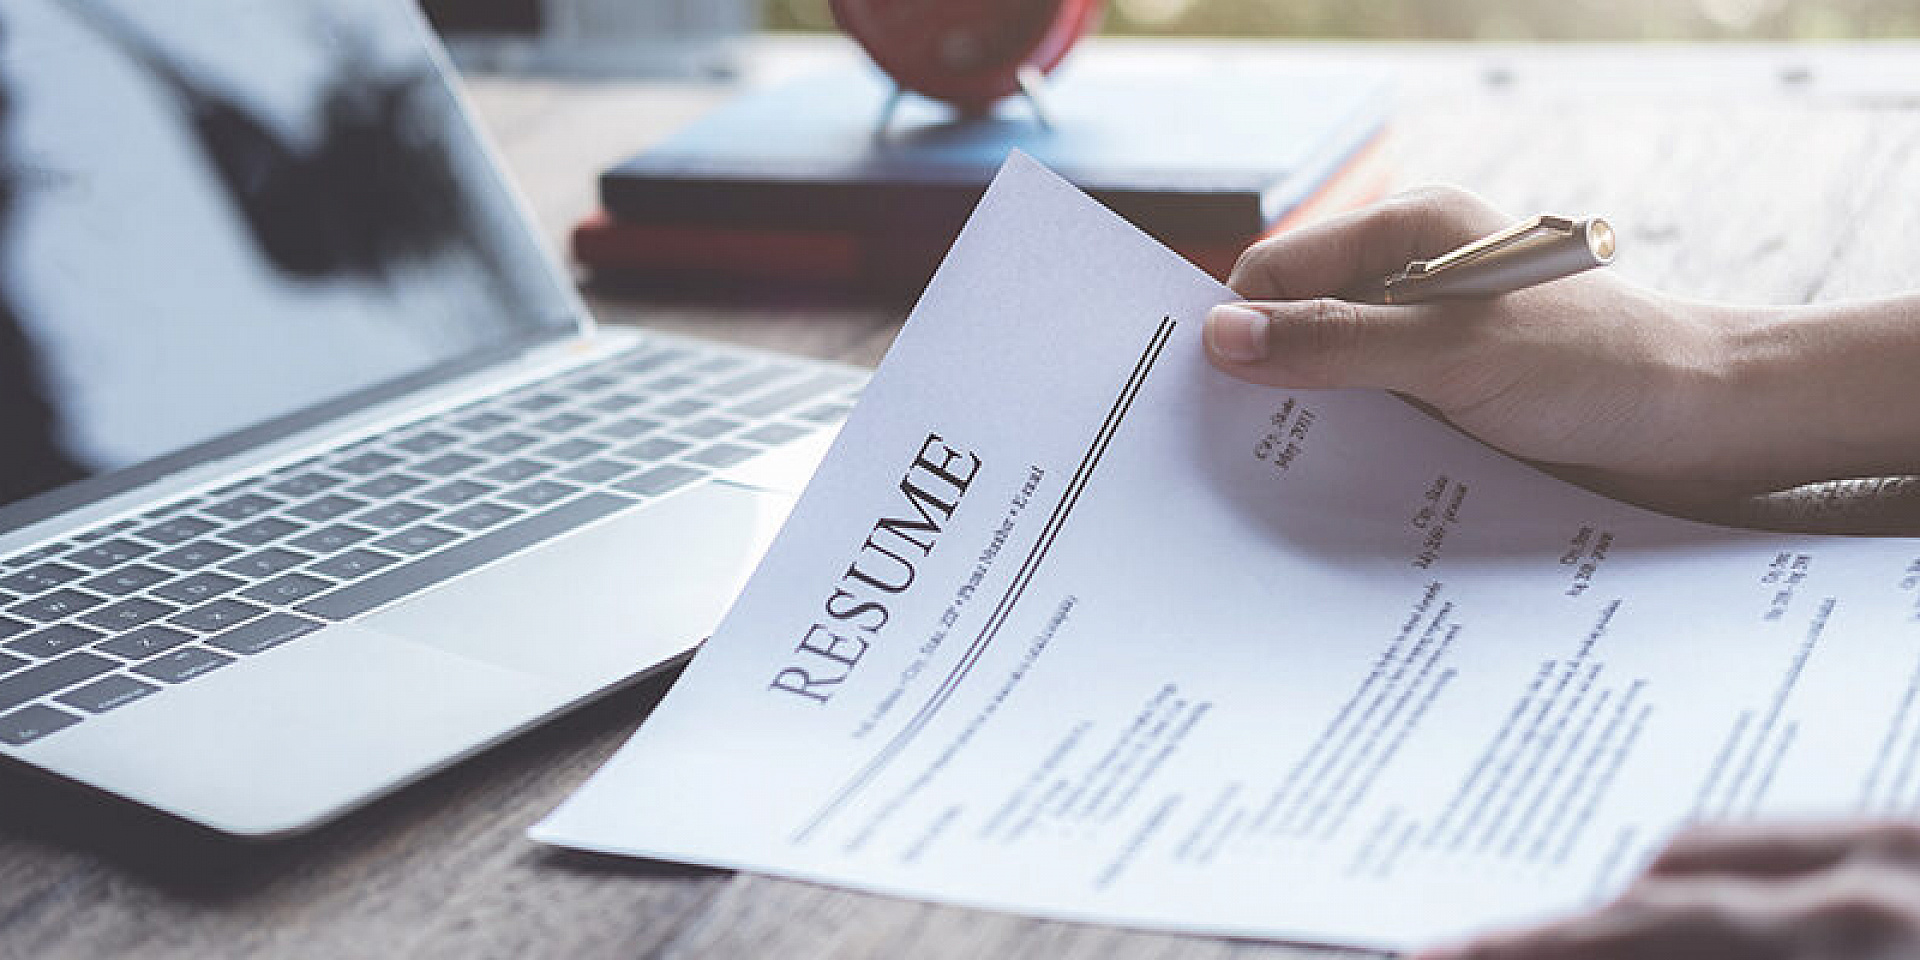 Image of a resume on a table.